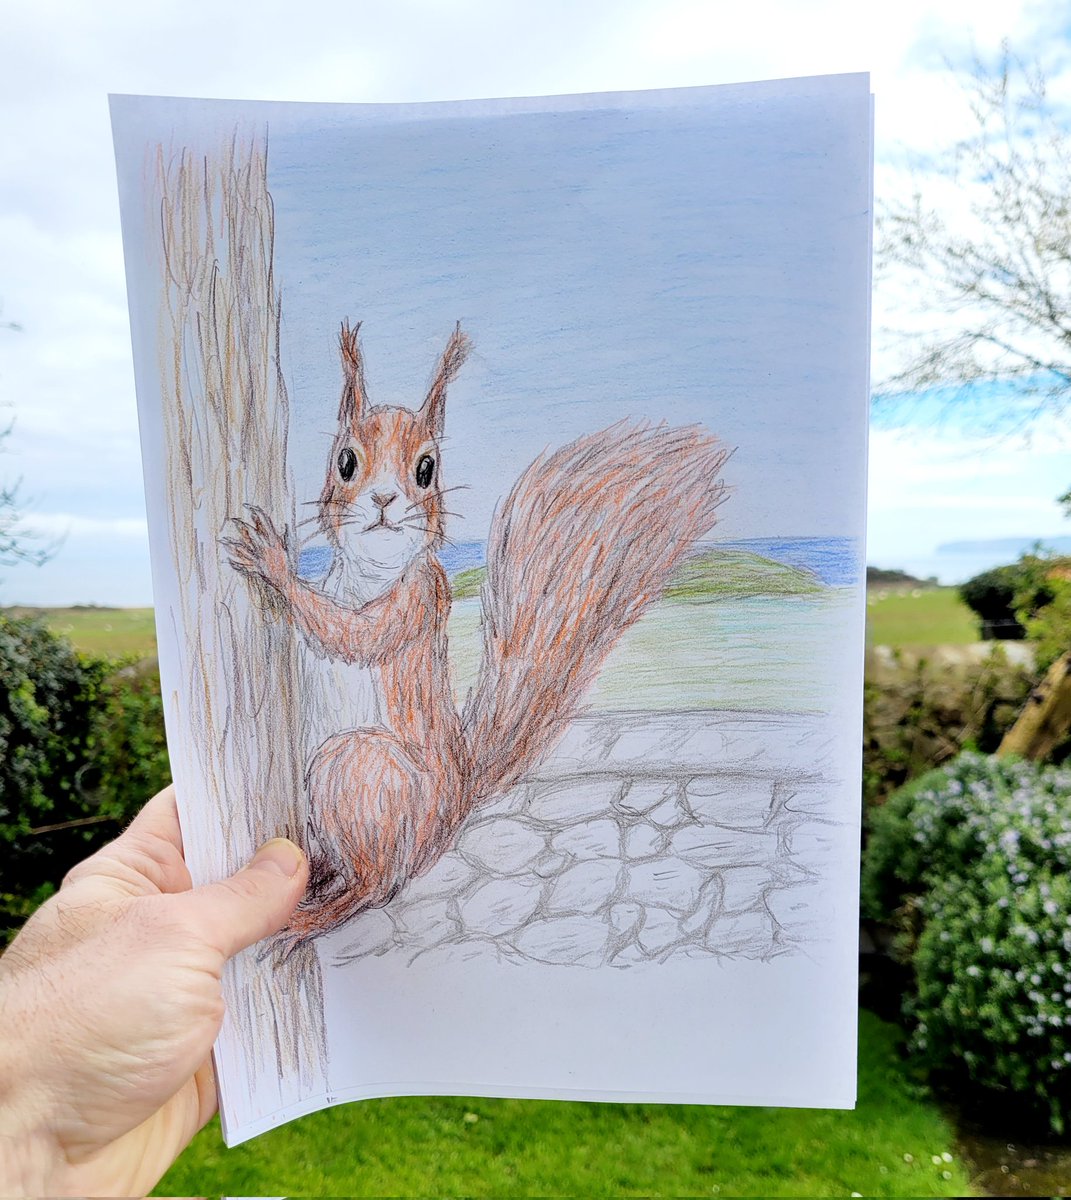 We finally spotted our first red squirrel which is native to Anglesey but as usual I was slow to get my camera out. However I did a quick sketch from memory which is almost close enough. 🐿 #redsquirrel #wildlifeart #sketch #pencilcrayonart #illustration #animalart #drawing